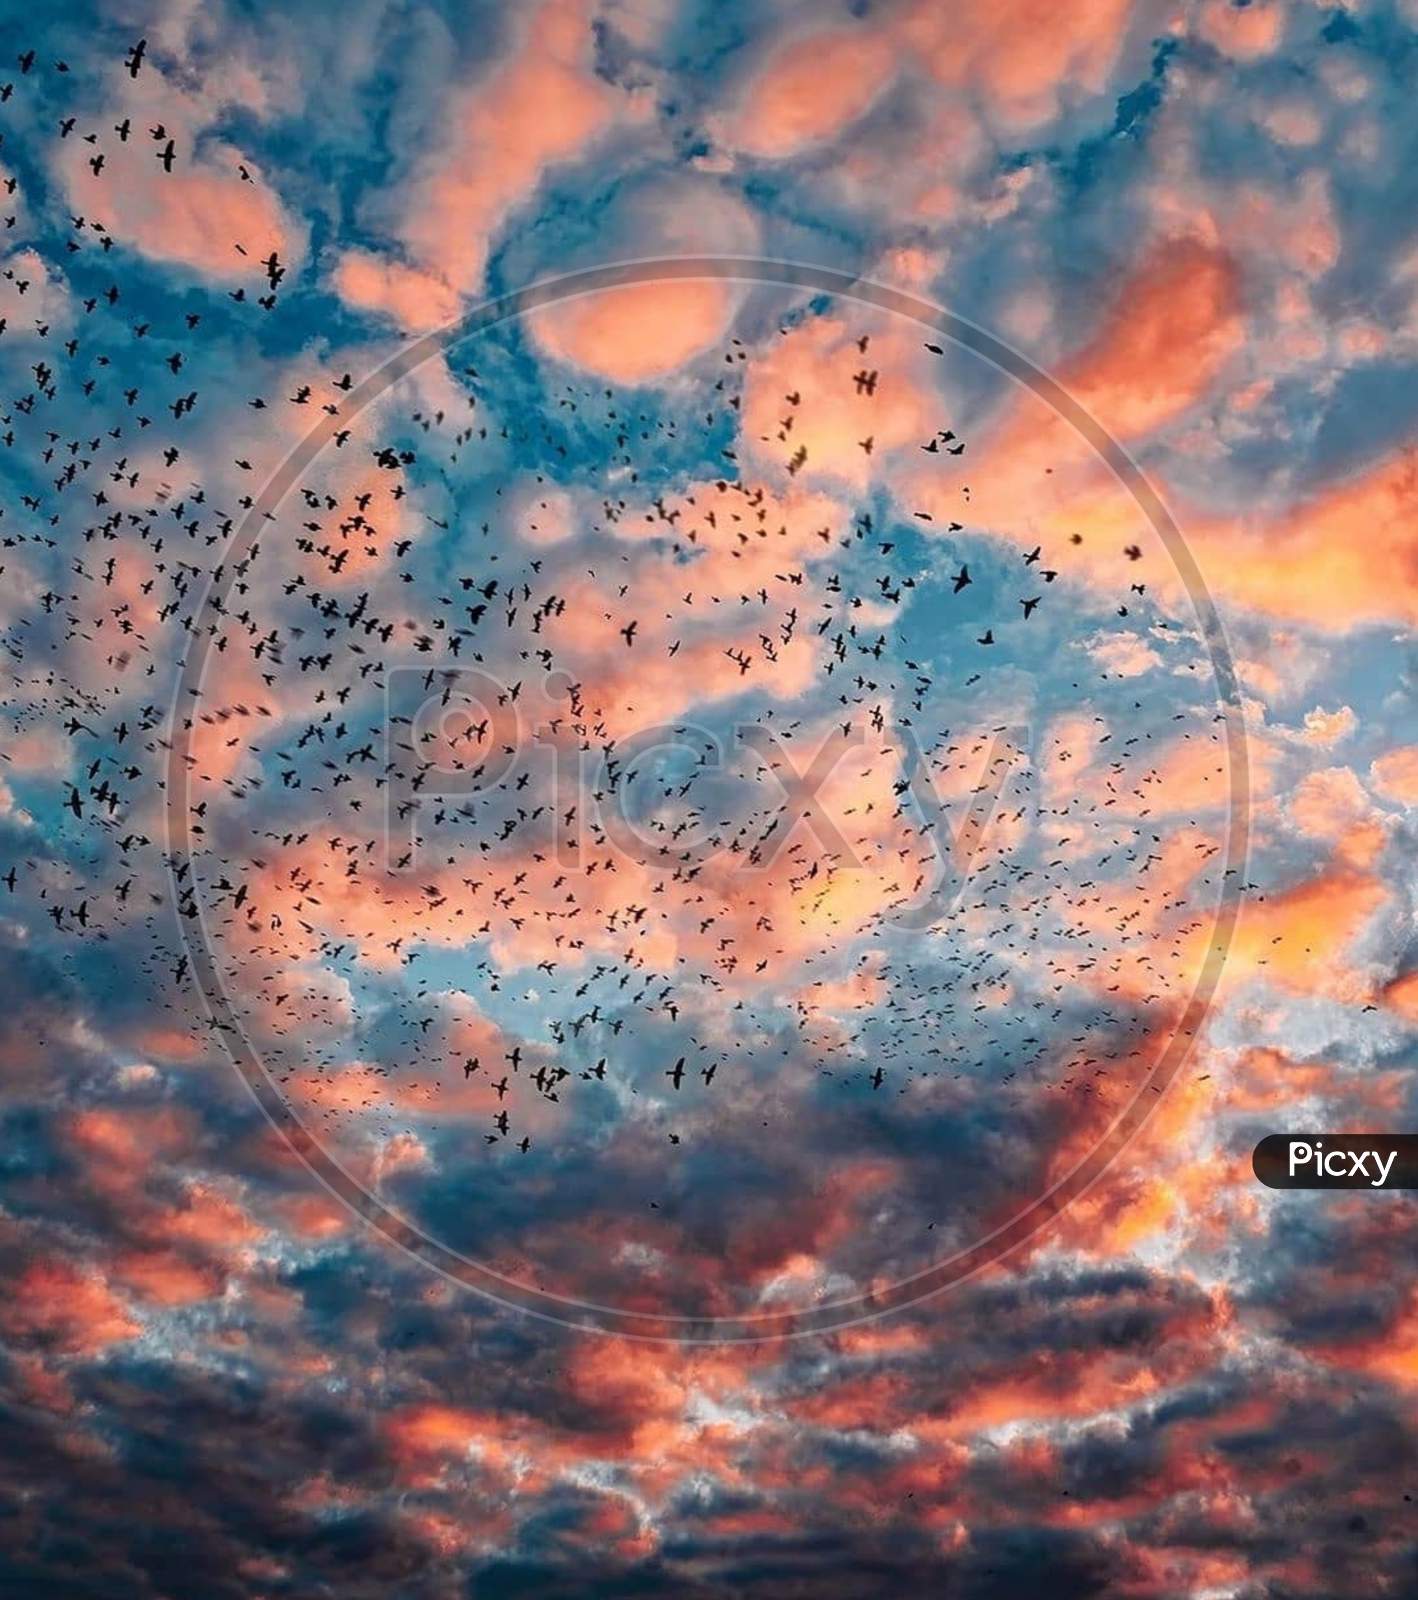 A blue orange coloured clouds with thousands of birds